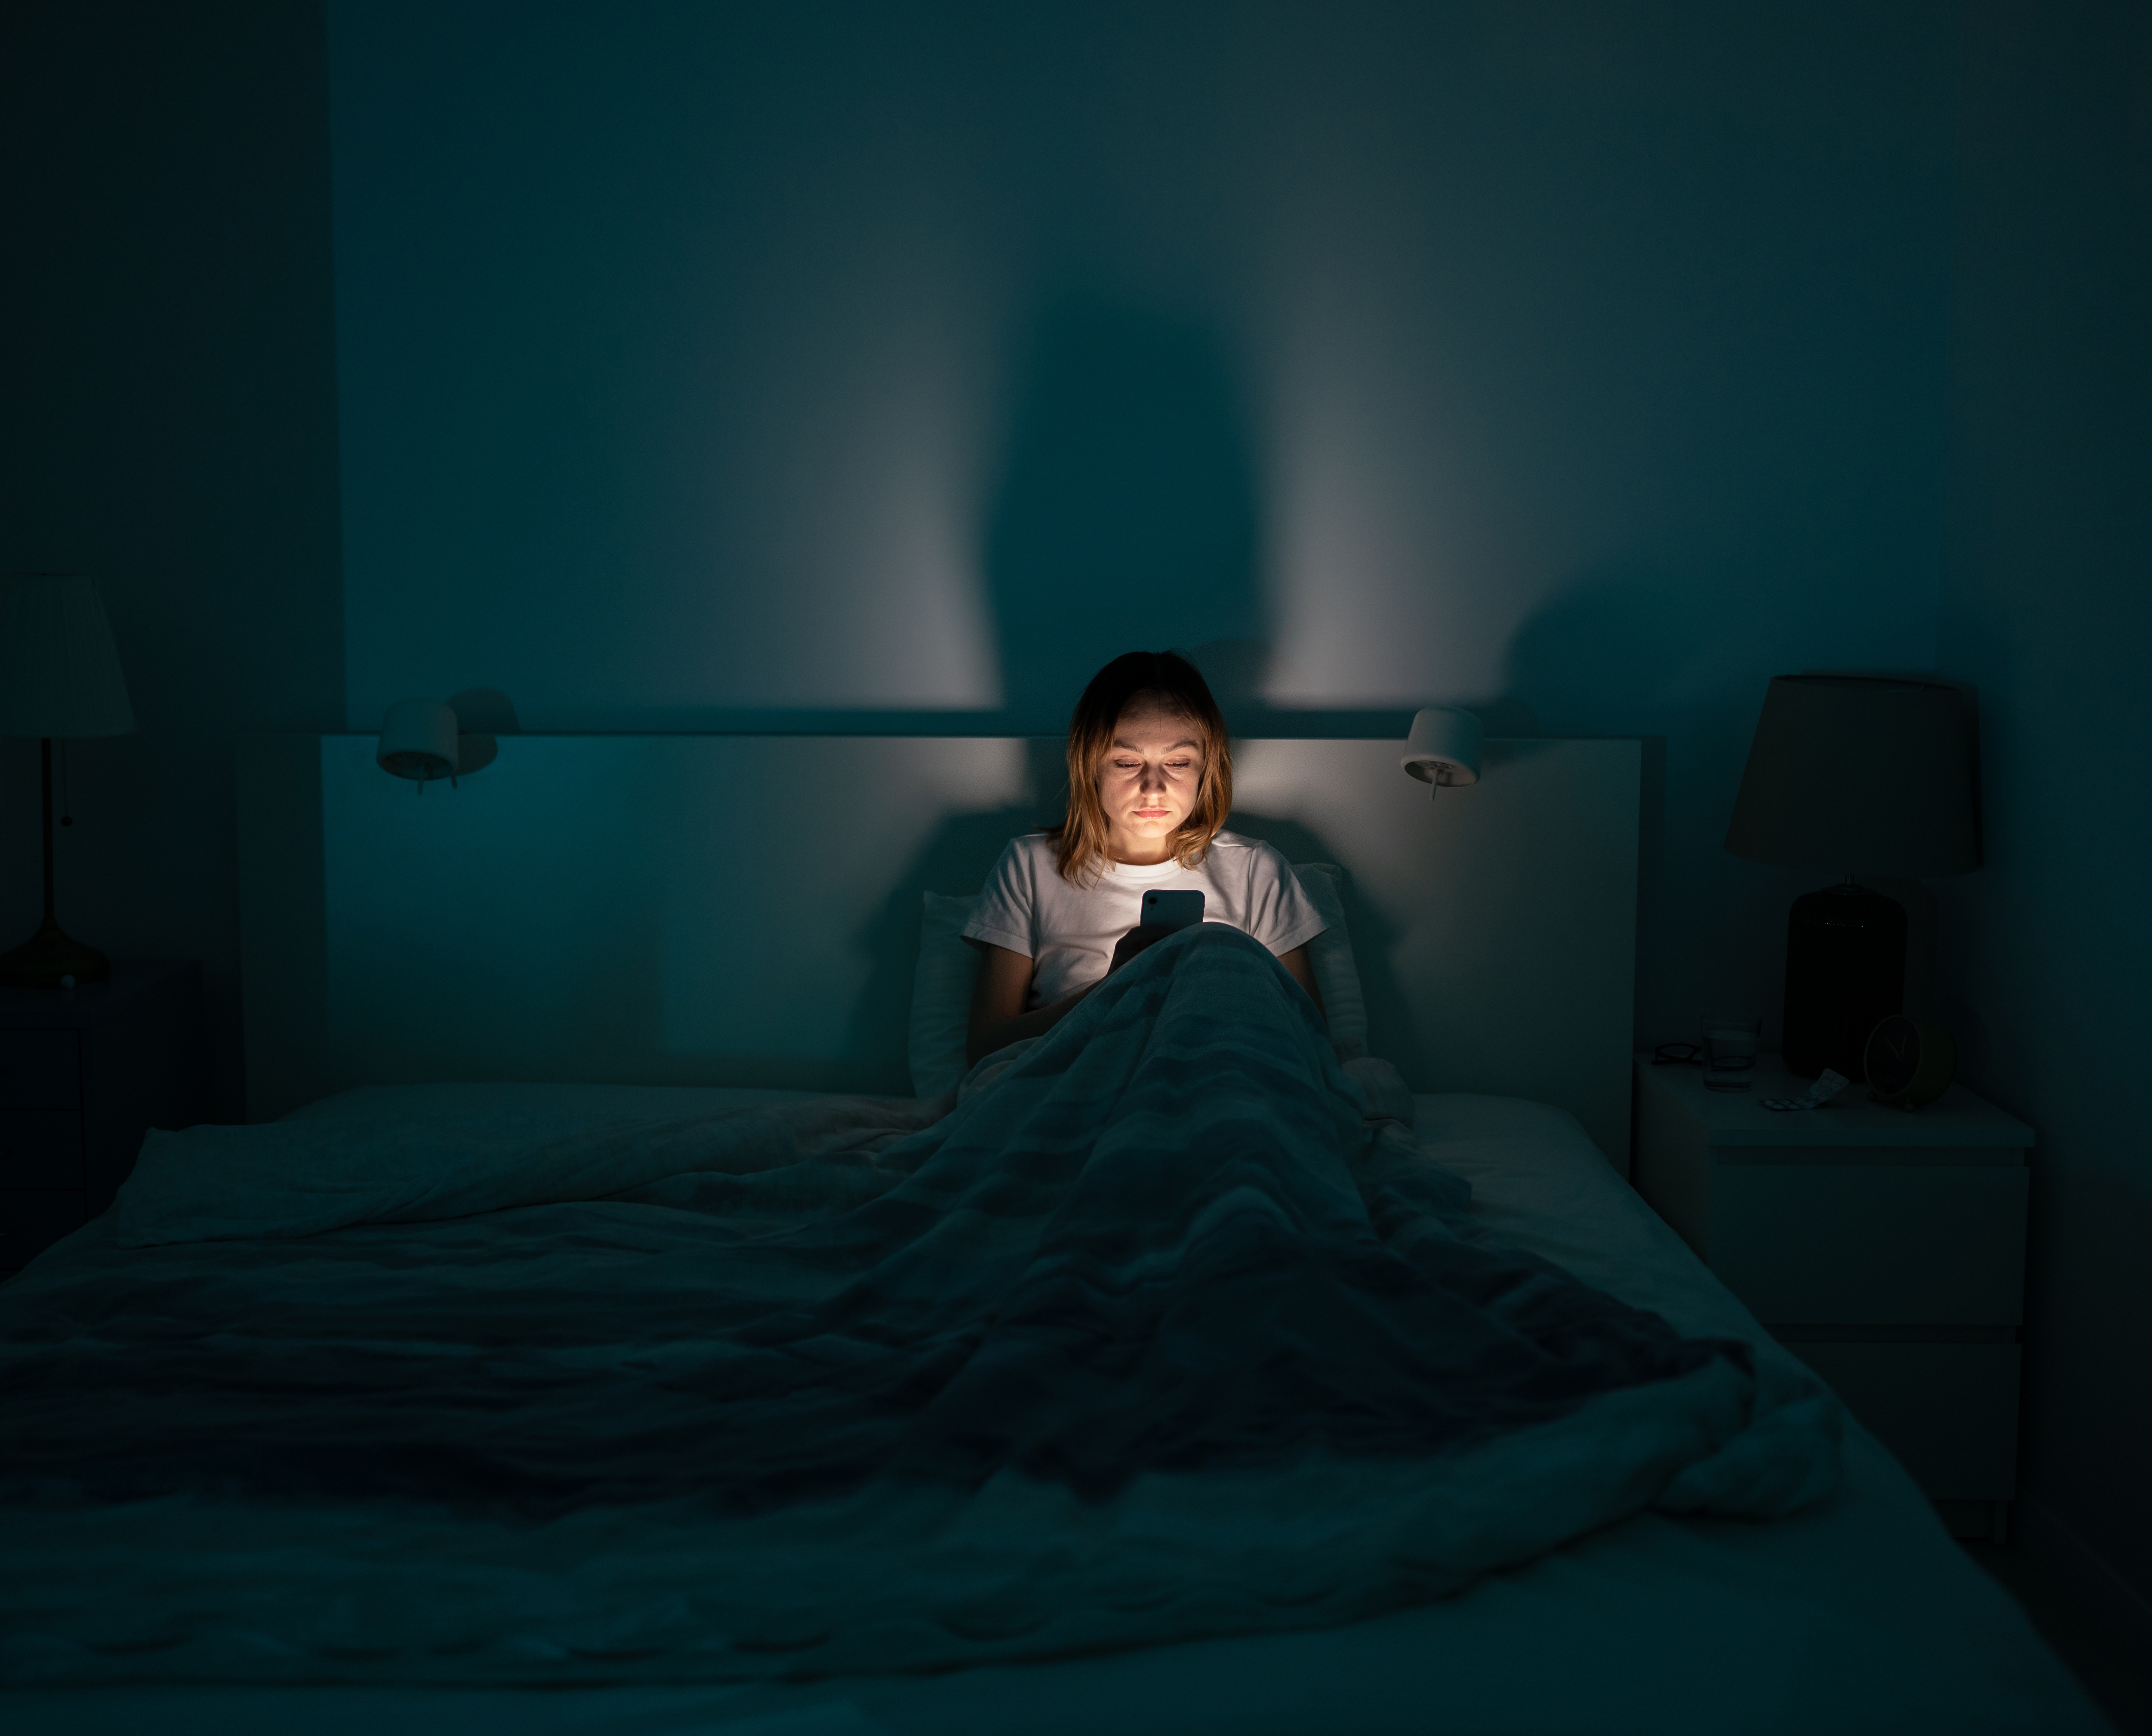 A woman sits alone in a large bed on her phone with the lights off, the light from her phone illuminating her face.